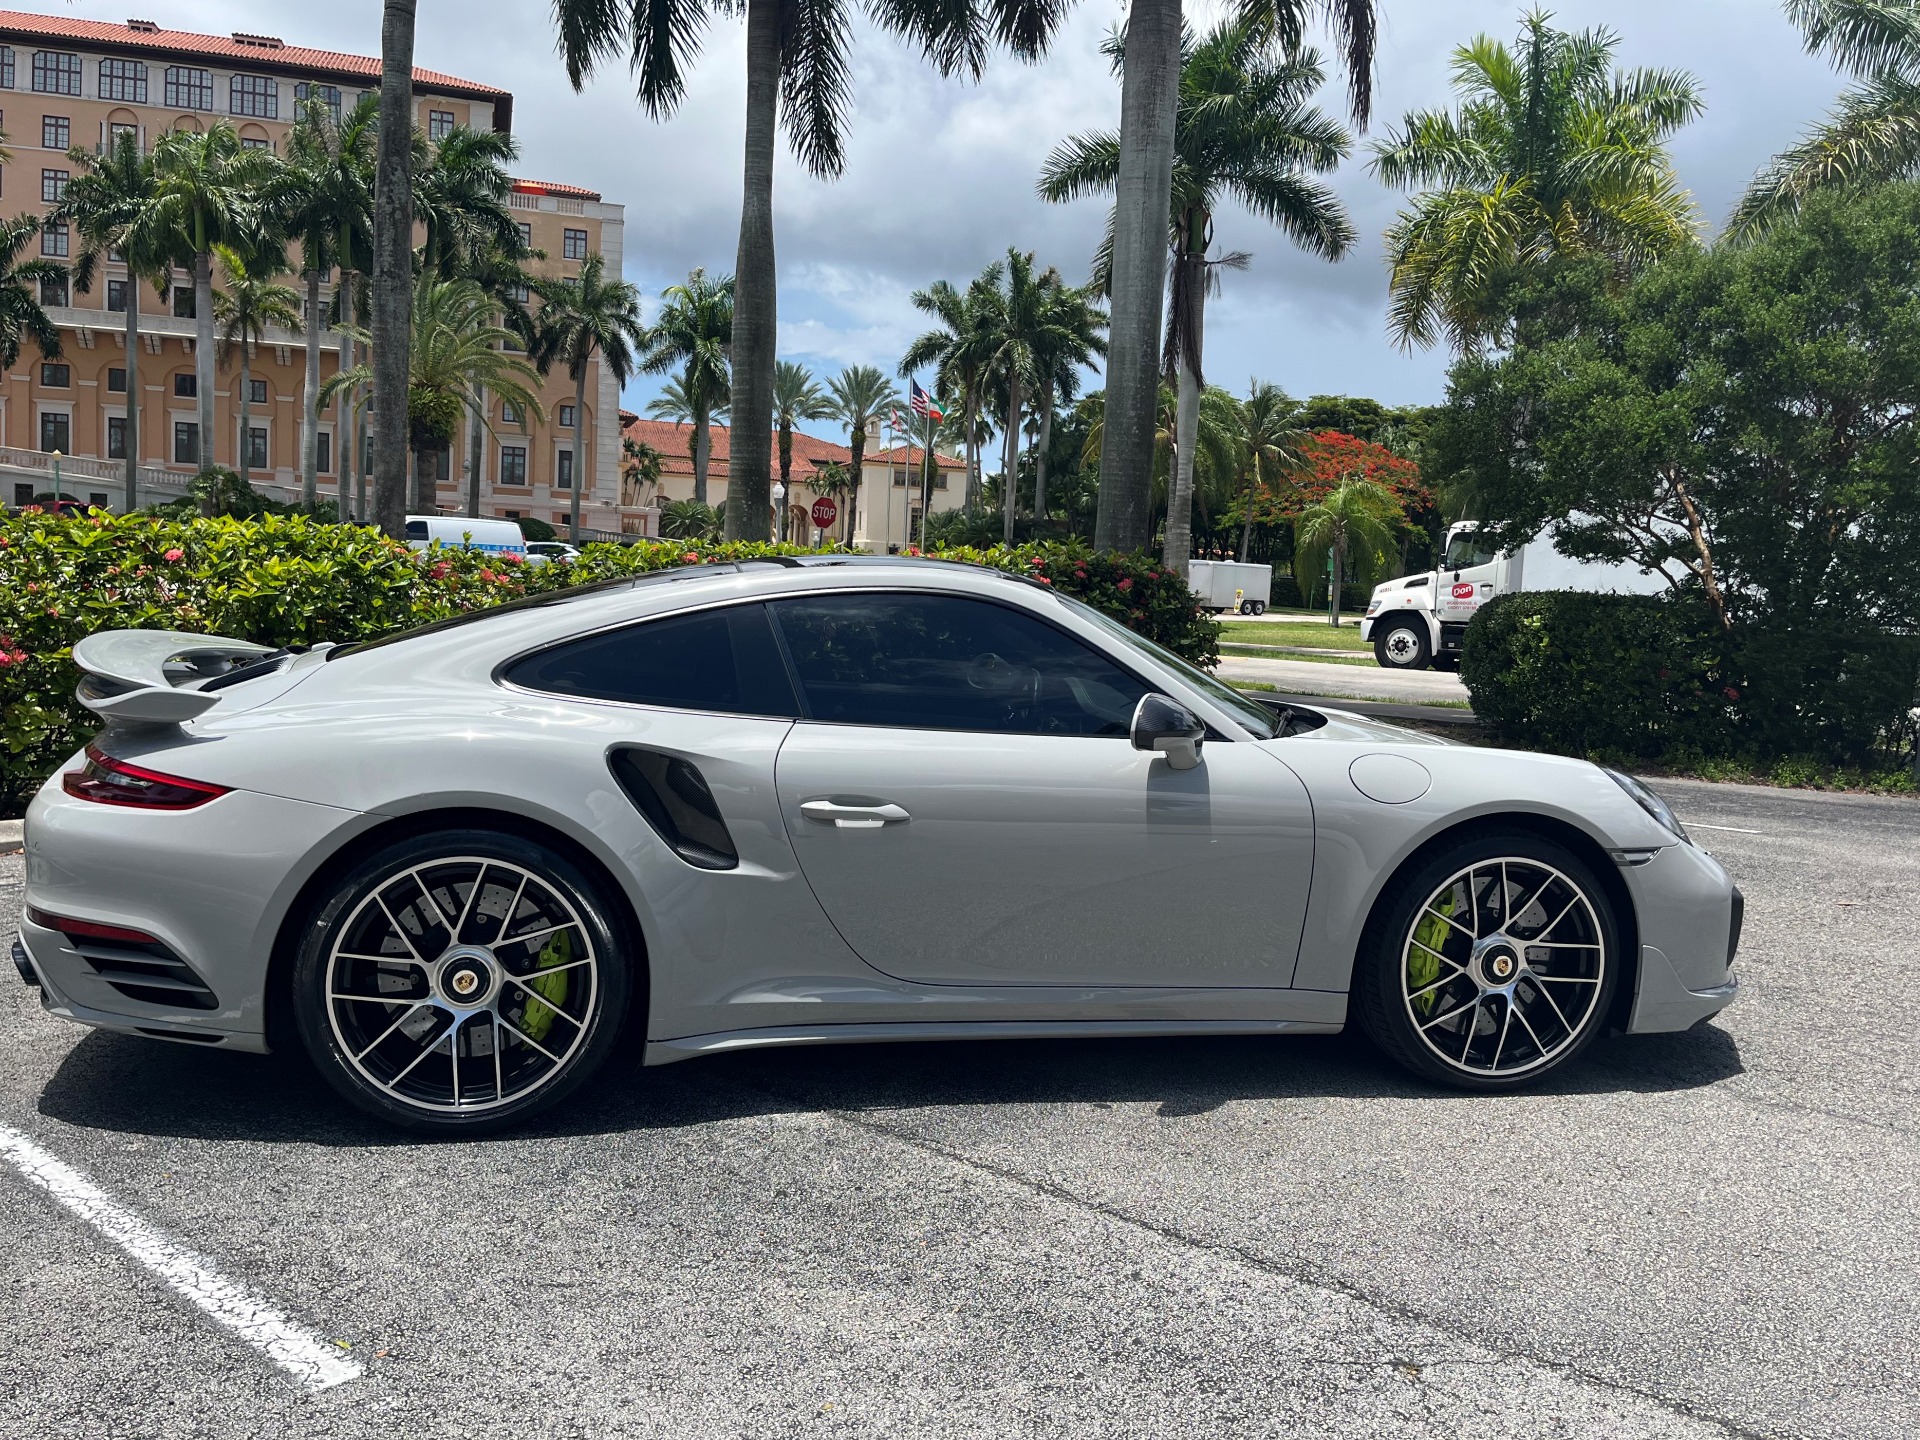 Used 2018 Porsche 911 Turbo S for sale $166,850 at The Gables Sports Cars in Miami FL 33146 4